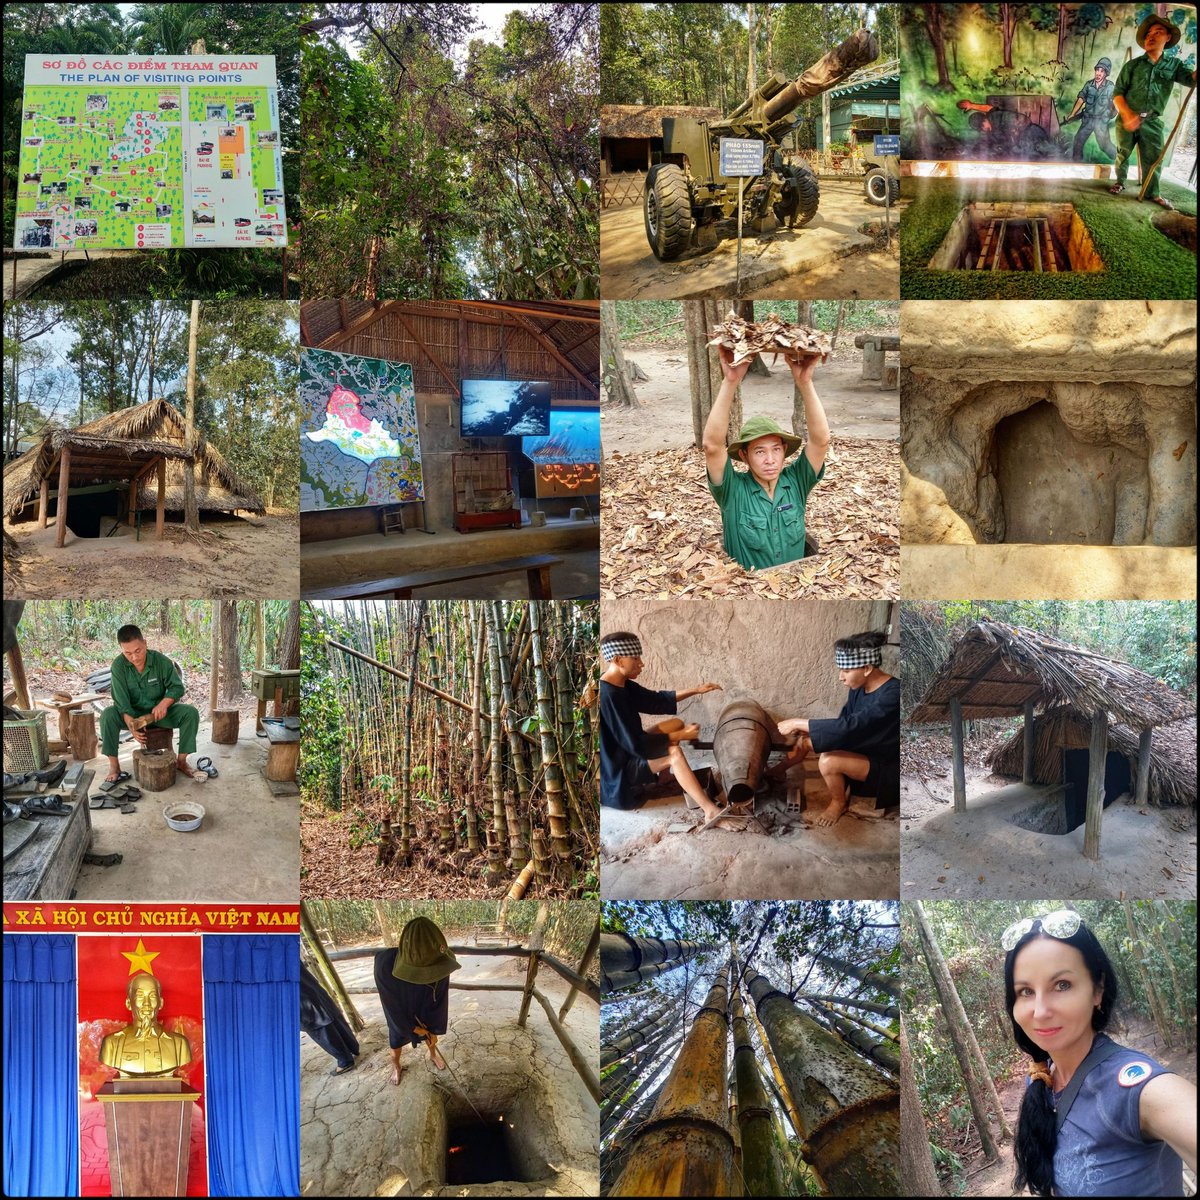 #goodmorning & have a nice Tuesday 😊 #VietnamAdventure - 12 - #CuChiTunnels Moral of yesterday: 'Cleverness and the will to fight are sometimes worth more than the apparent power of even the most formidable opponent.' And #SongOfTheDay is youtu.be/fhNrqc6yvTU?si… #Travel